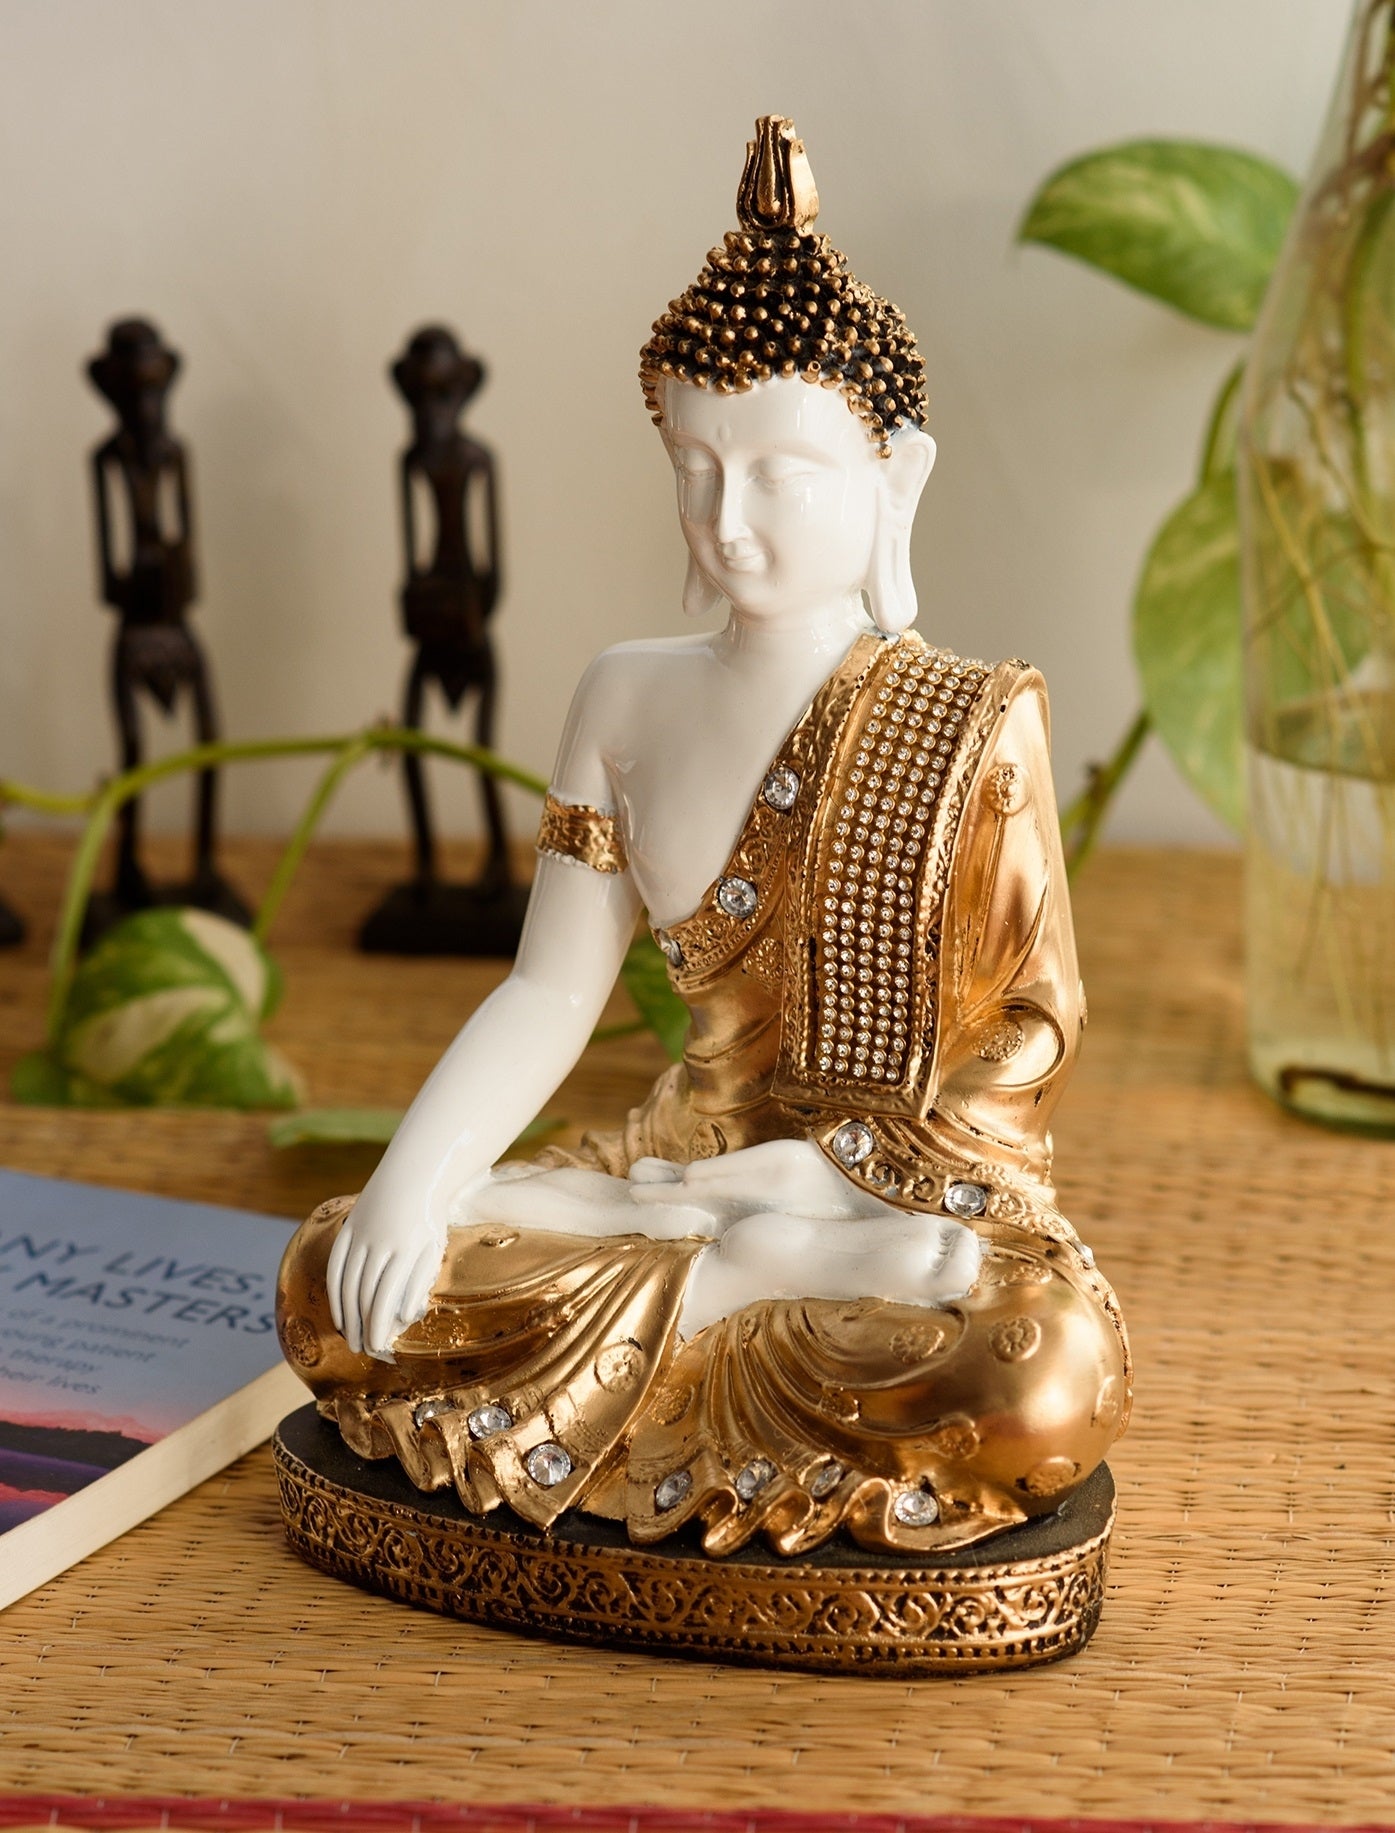 Polyresin White and Golden Handcrafted Decorative Meditating Buddha Statue